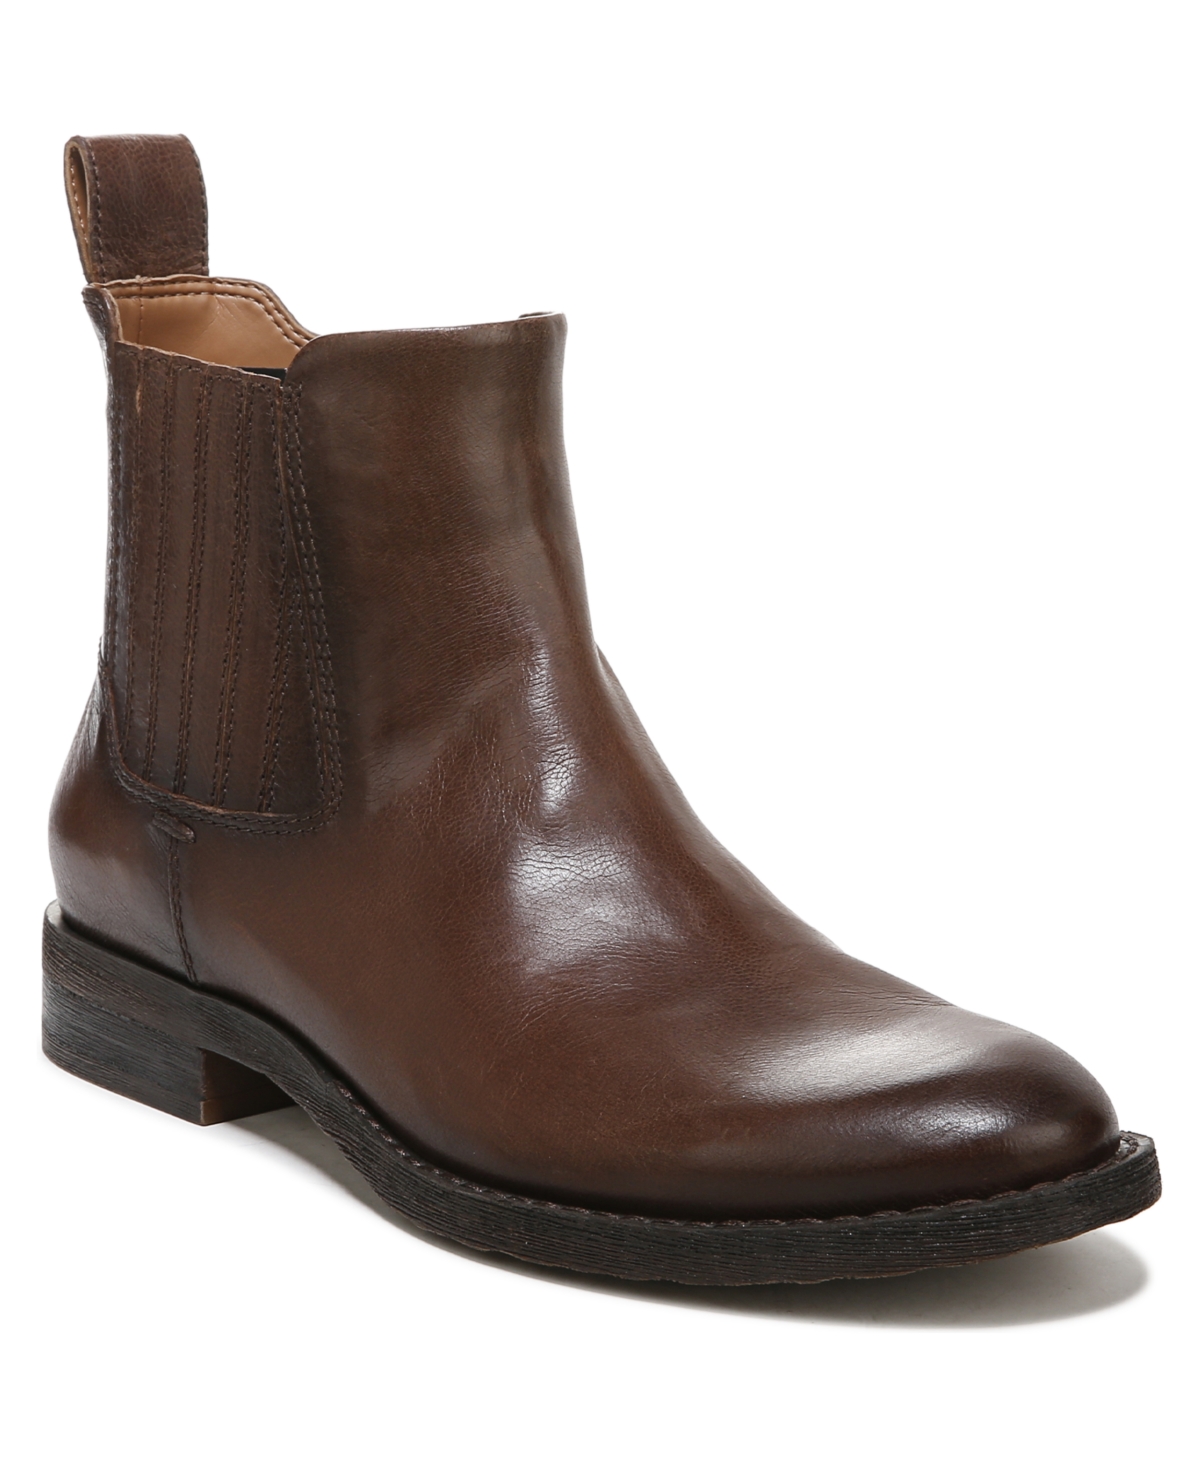 Linc Casual Leather Booties - Dark Brown Leather